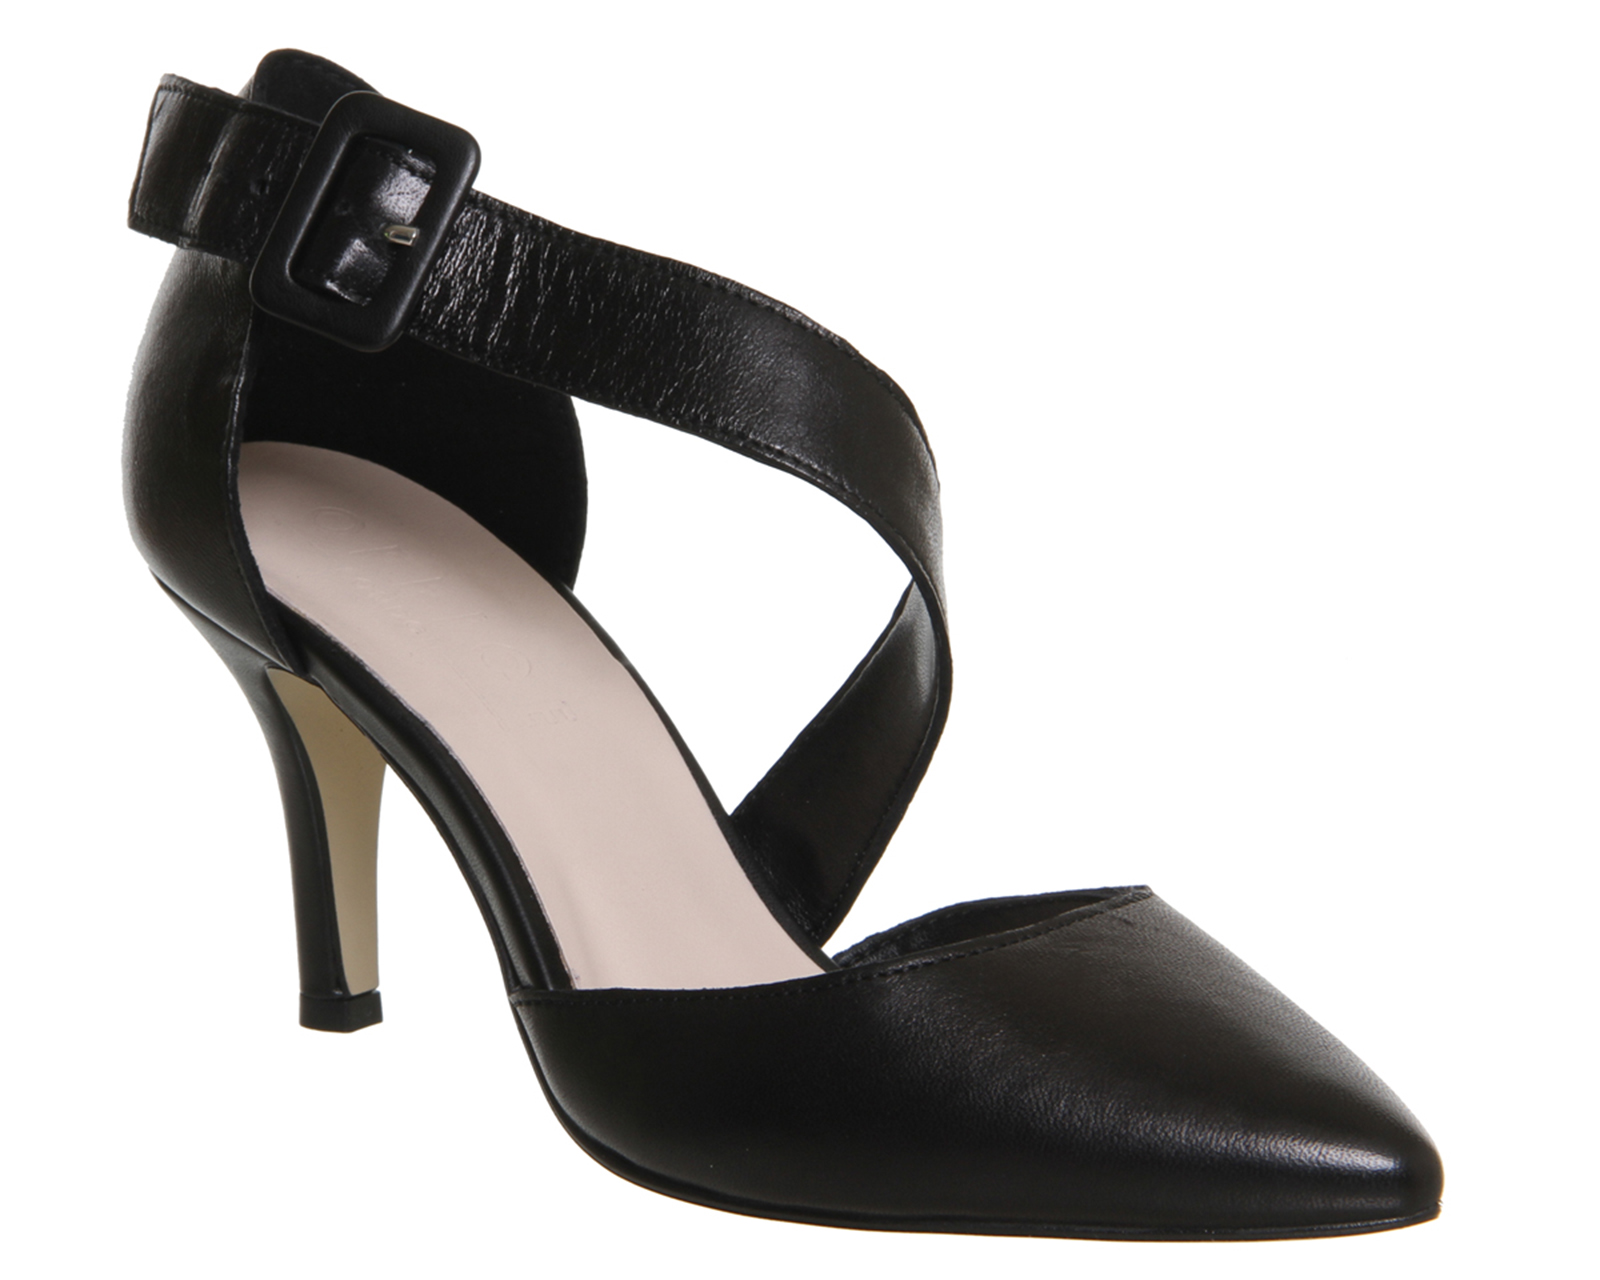 OFFICEWallace Point Court ShoesBlack Leather